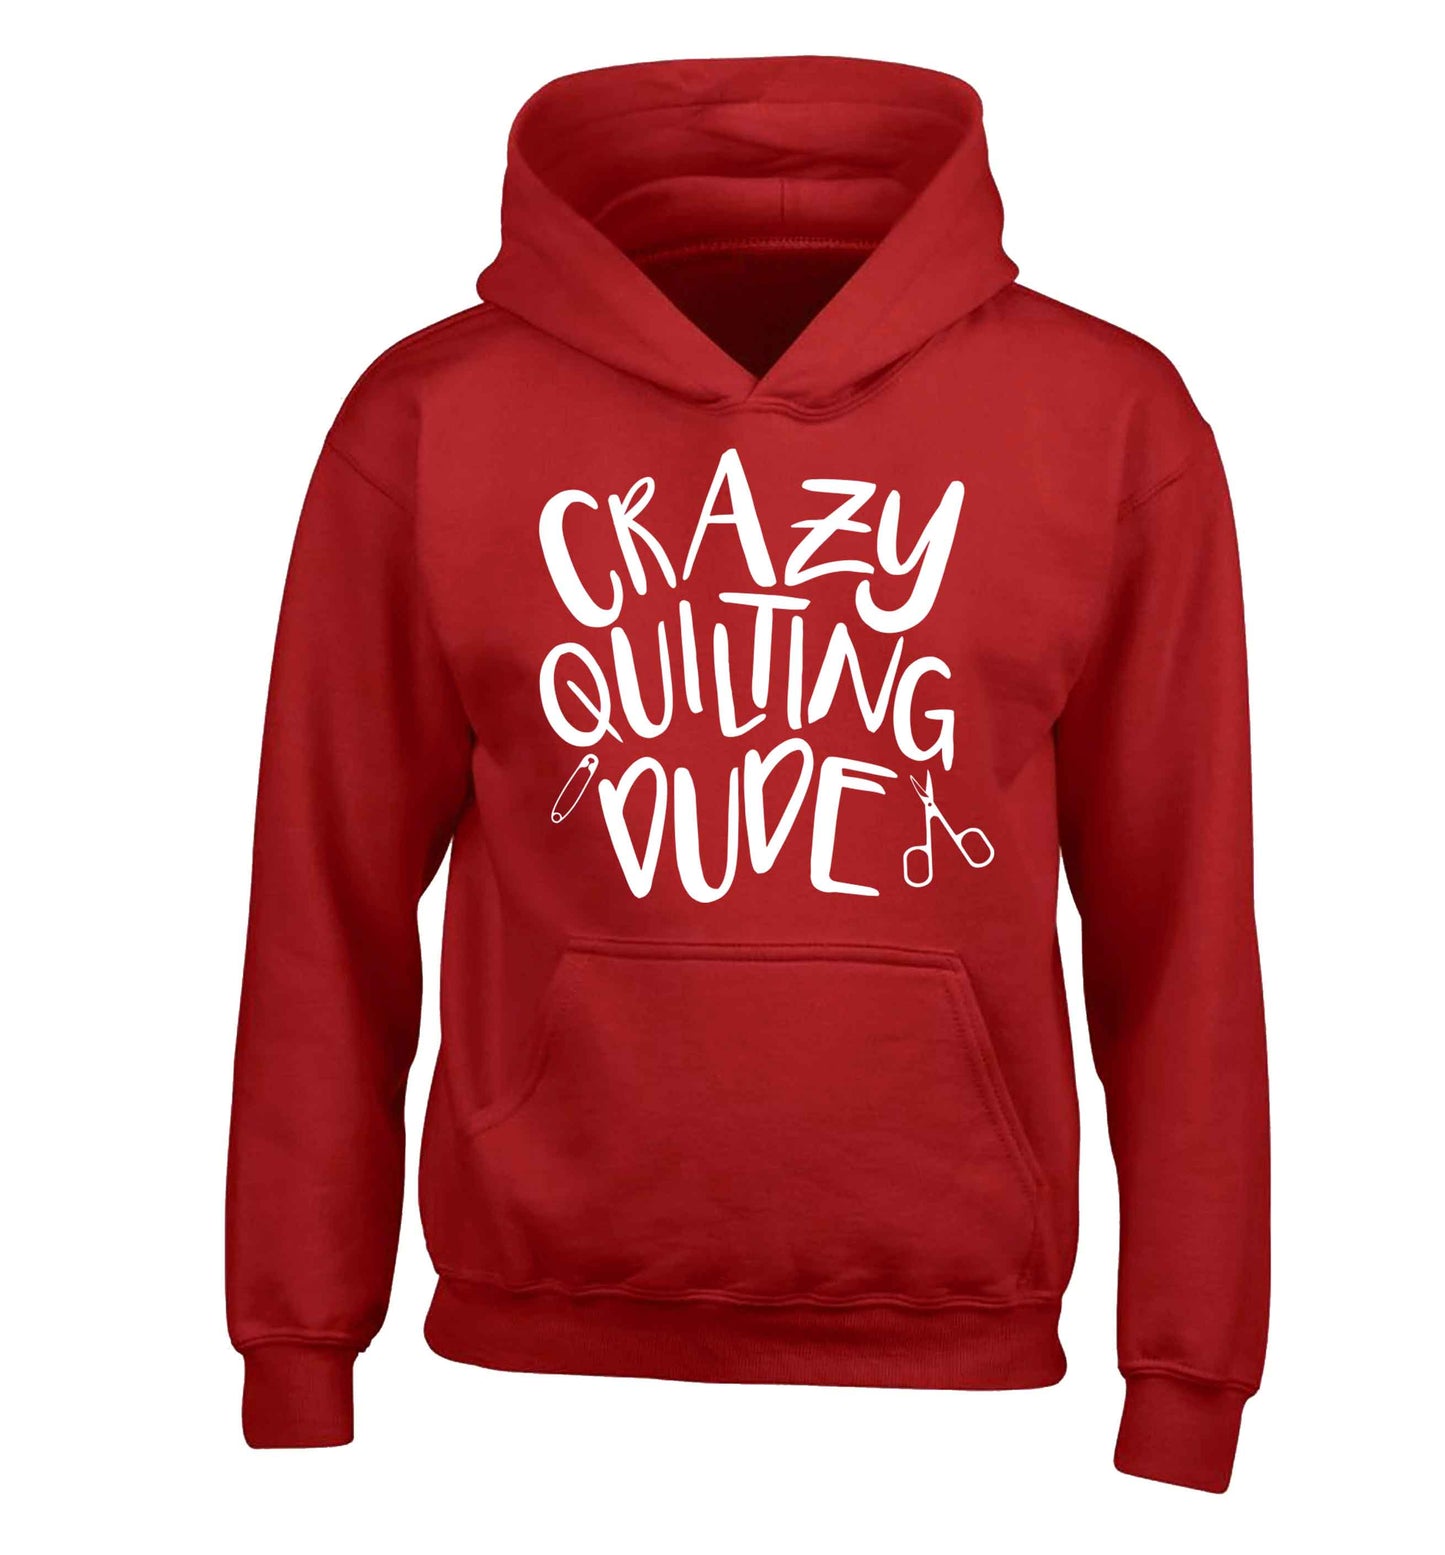 Crazy quilting dude children's red hoodie 12-13 Years